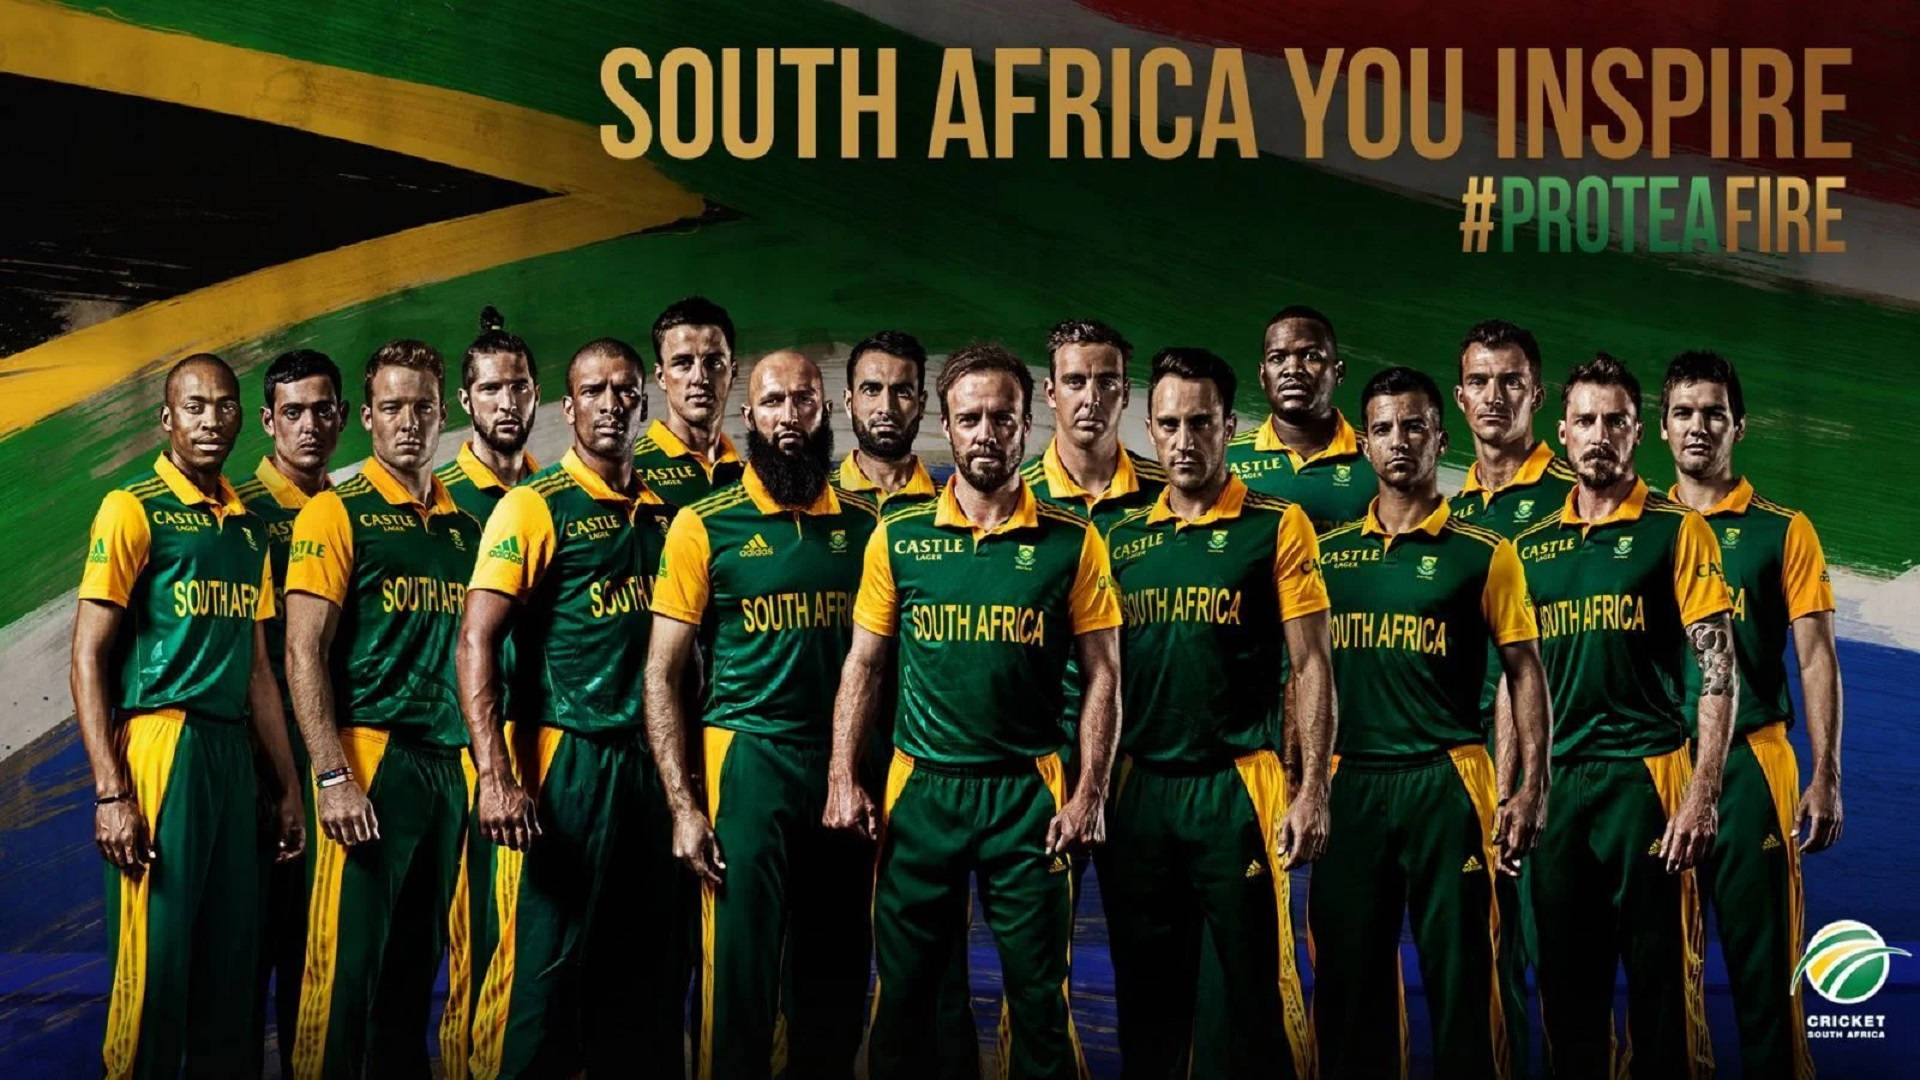 South Africa Cricket Team Poster Background